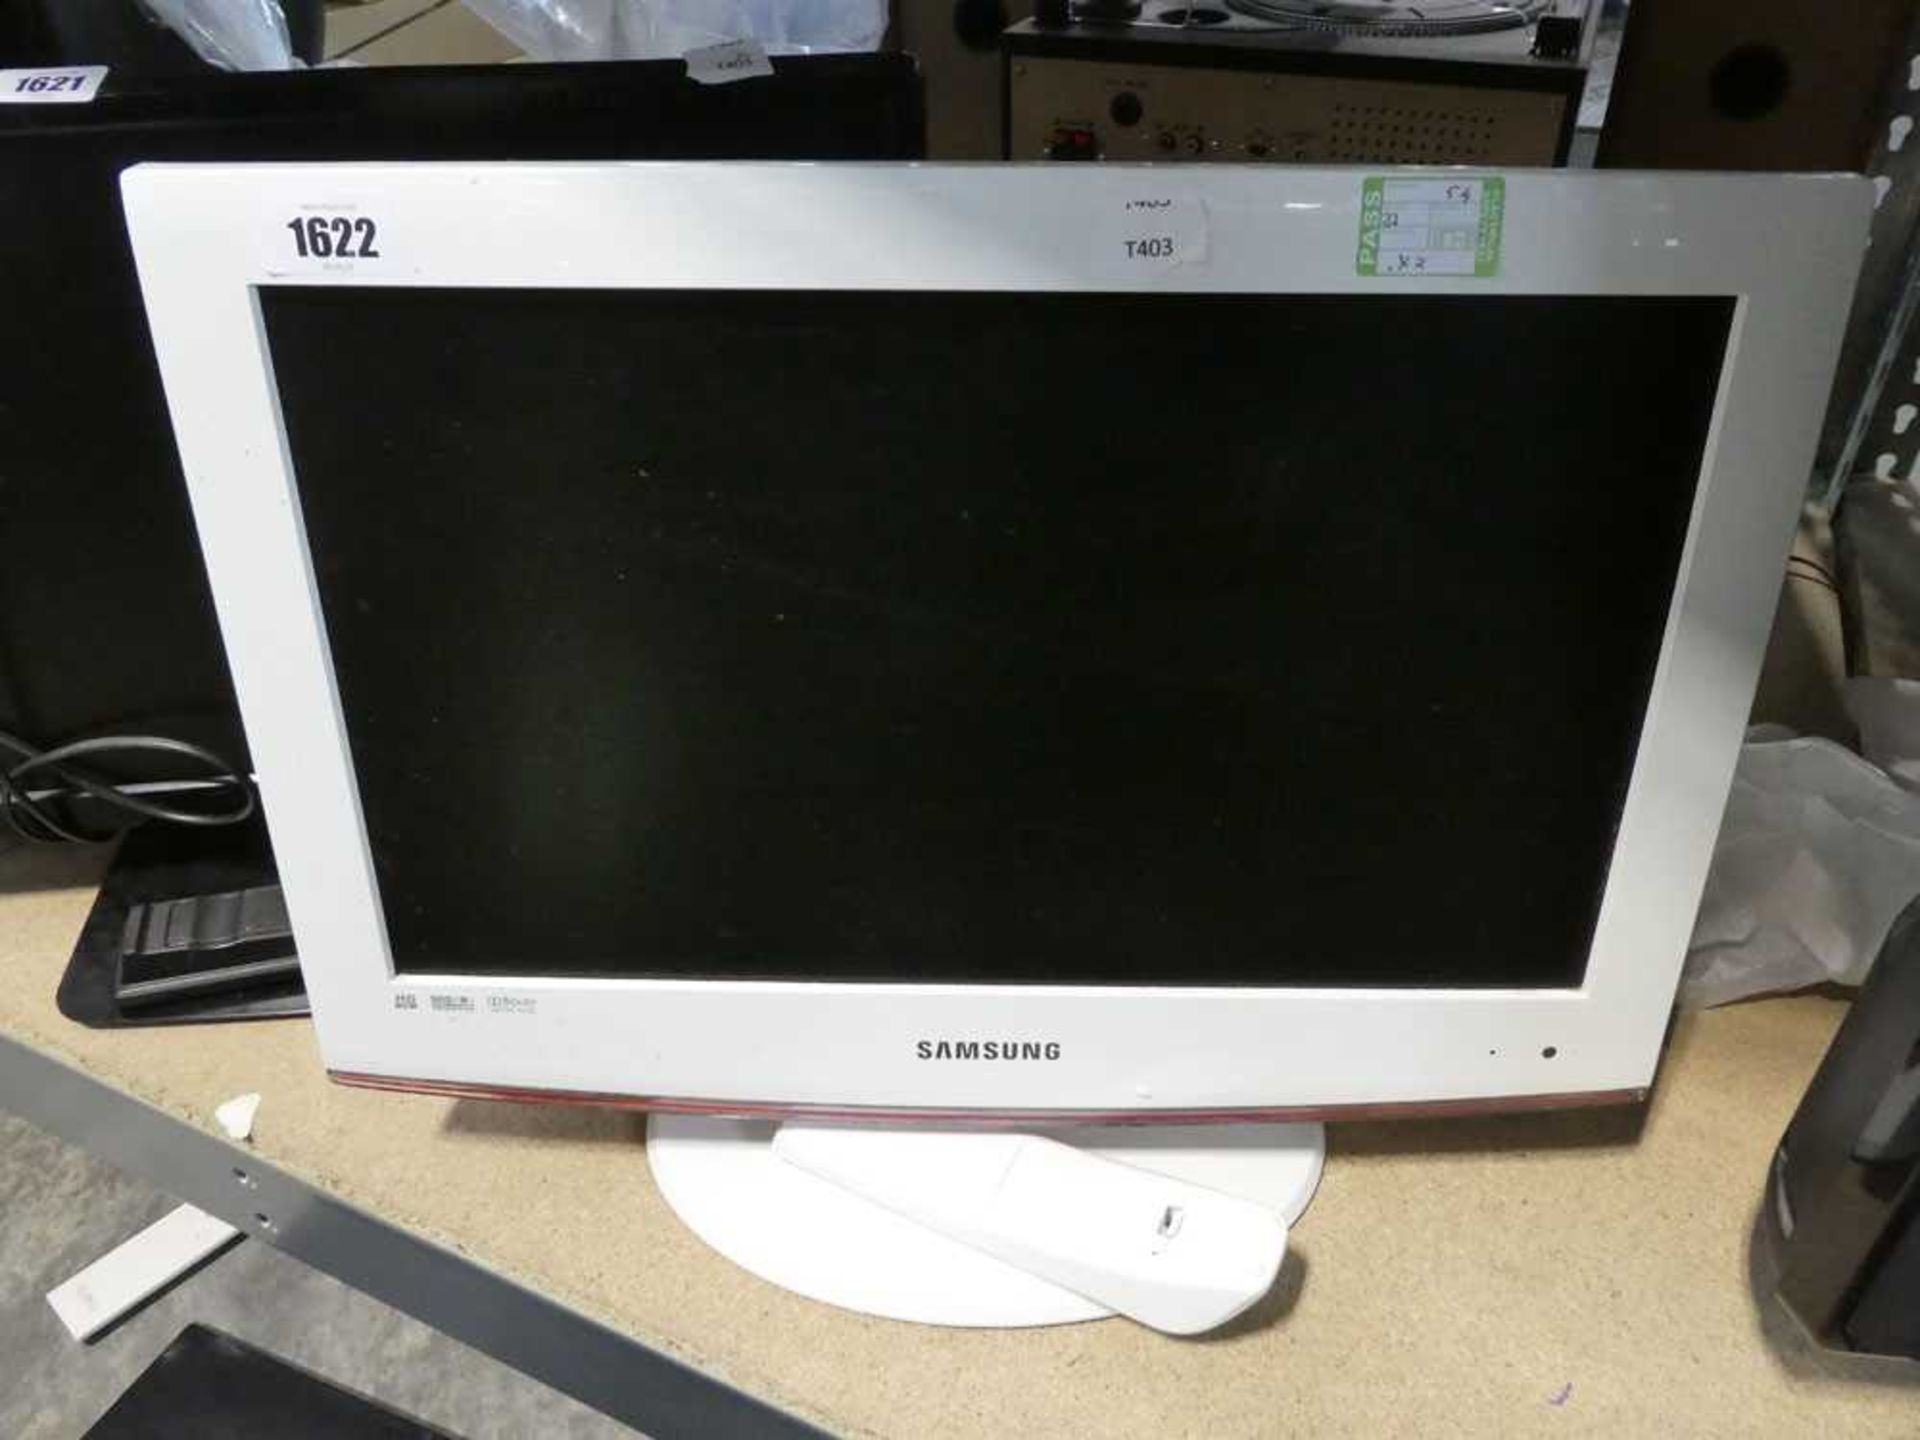 Samsung 19" TV with stand and remote control